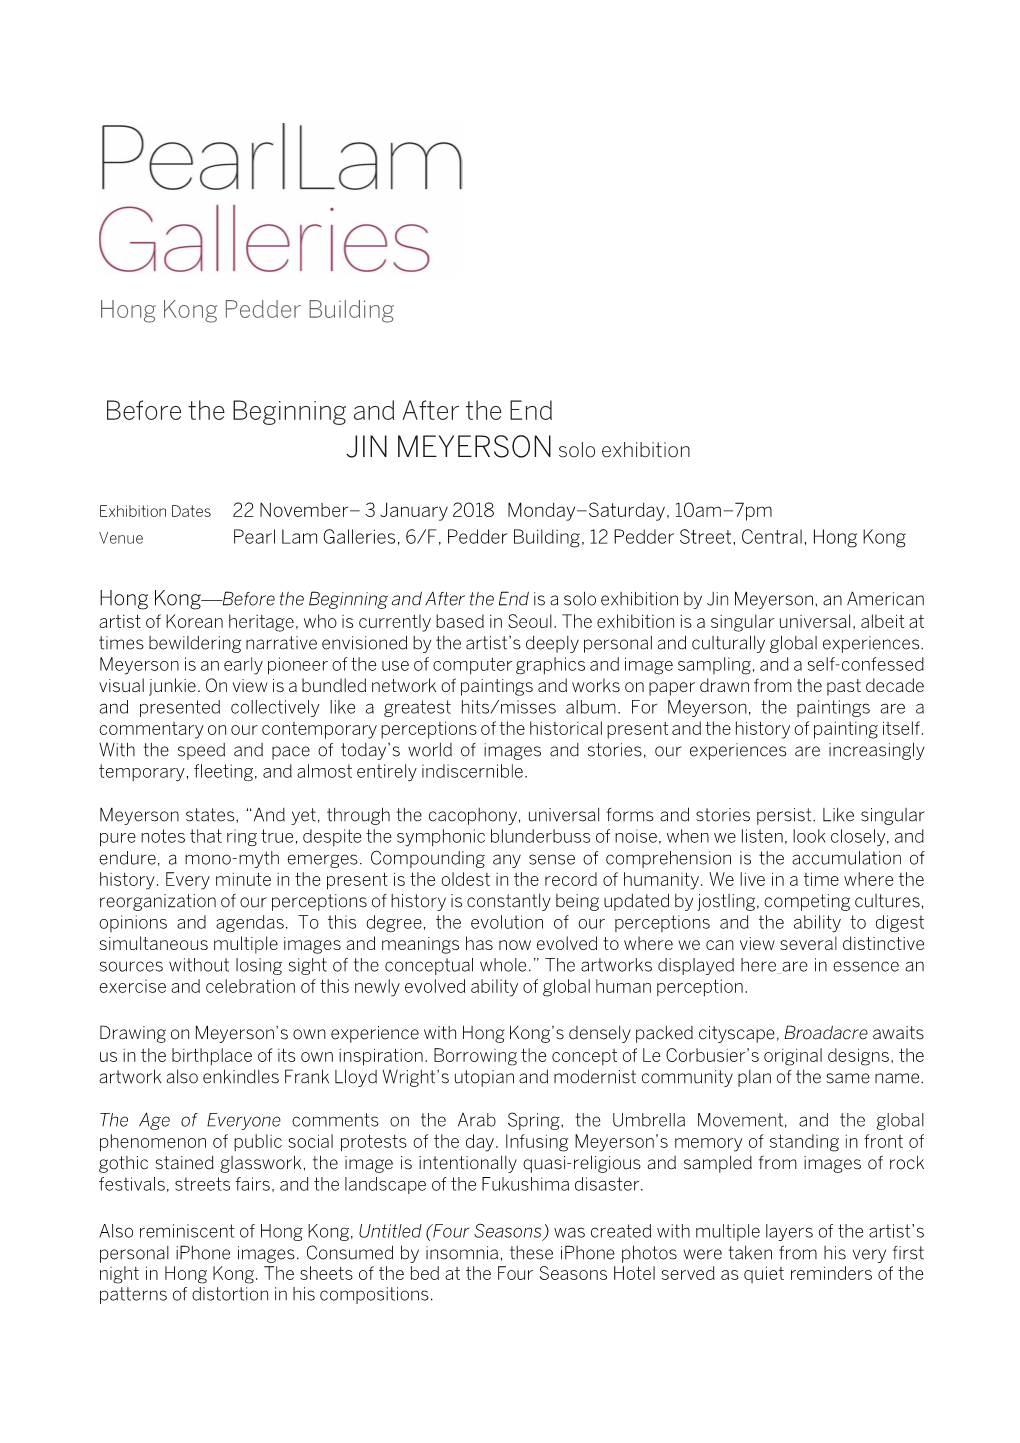 Before the Beginning and After the End JIN MEYERSON Solo Exhibition